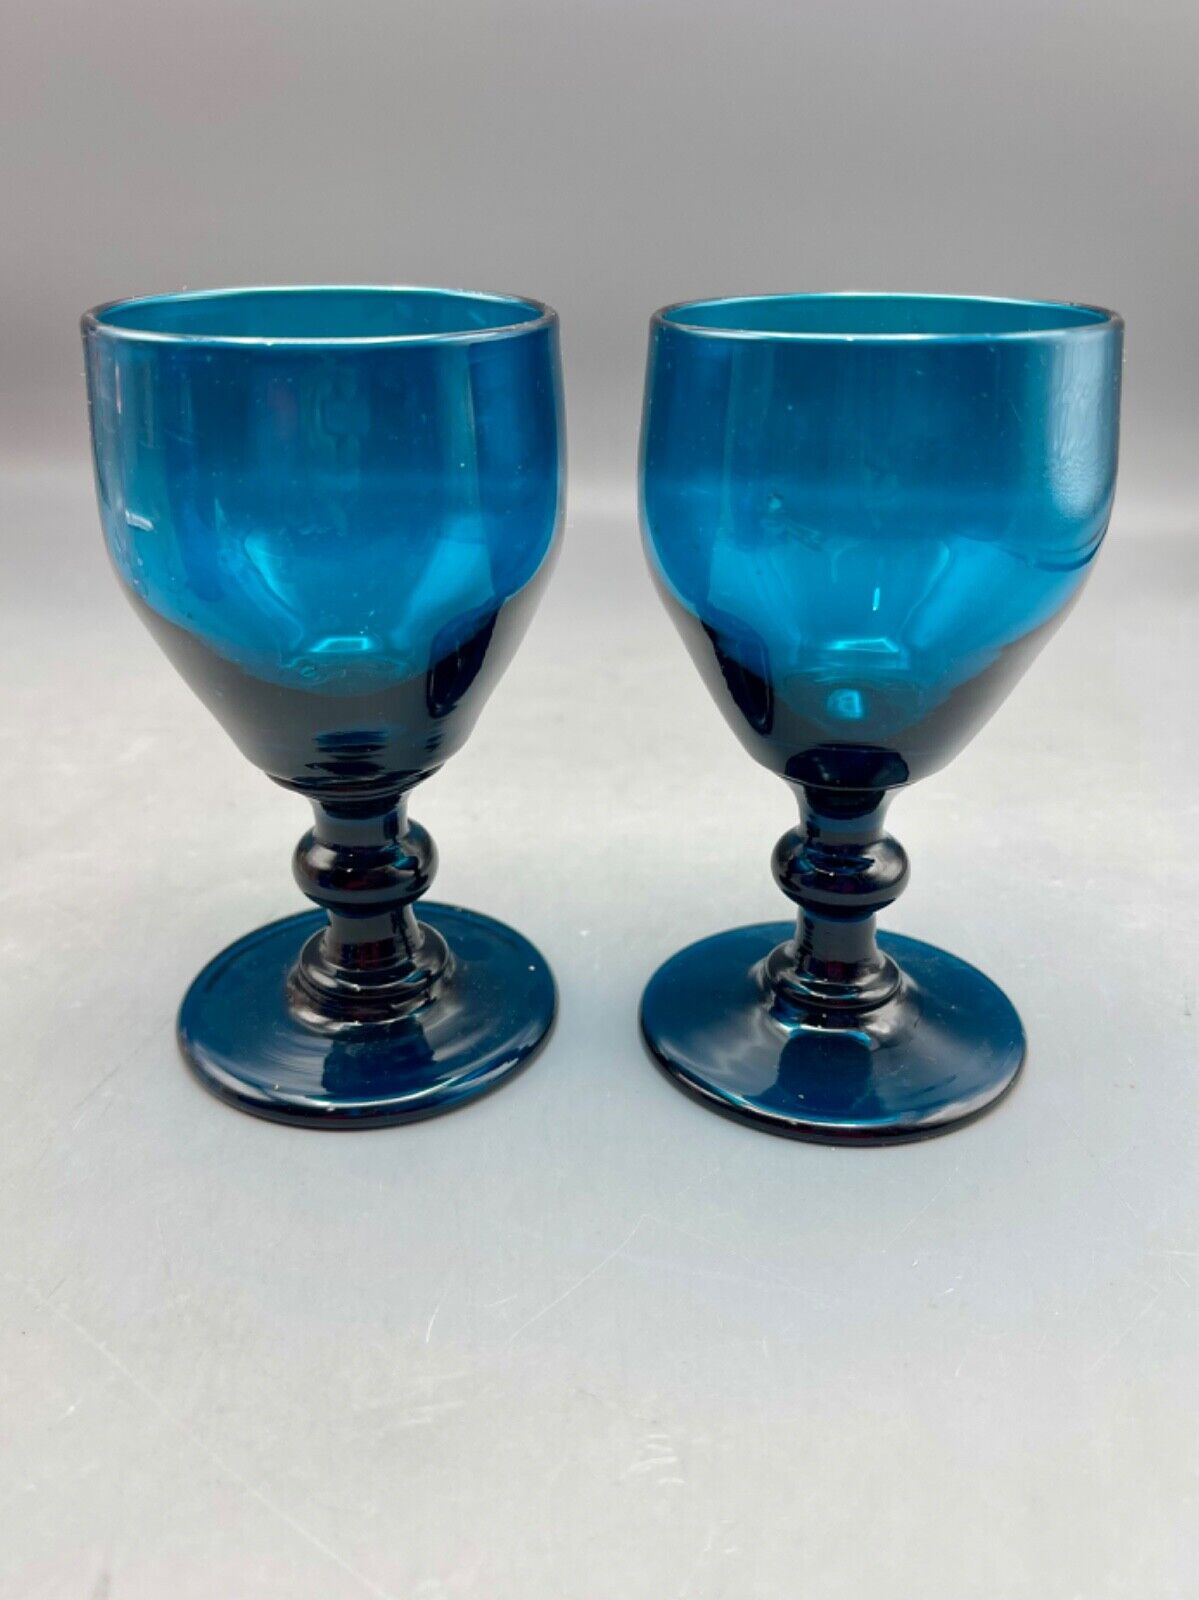 Antique English Peacock Blue Flint Glass Wine Glasses Hand Blown Early 19th Cen.